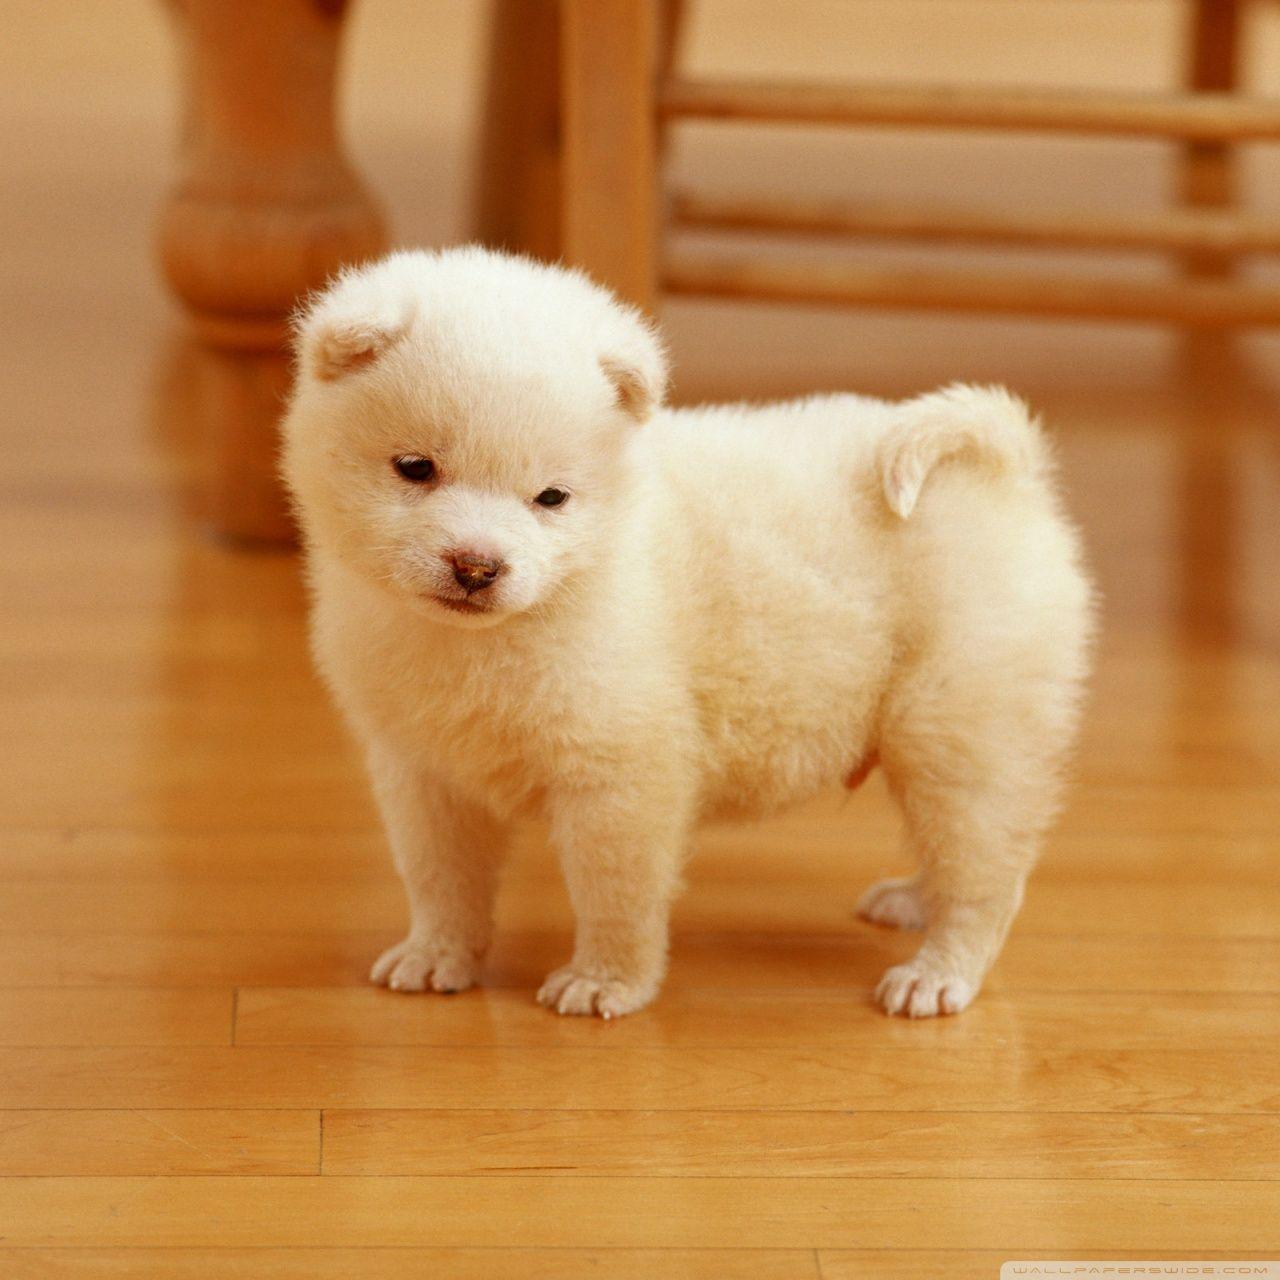 Cute Puppy Phone Wallpapers - Top Free Cute Puppy Phone ...